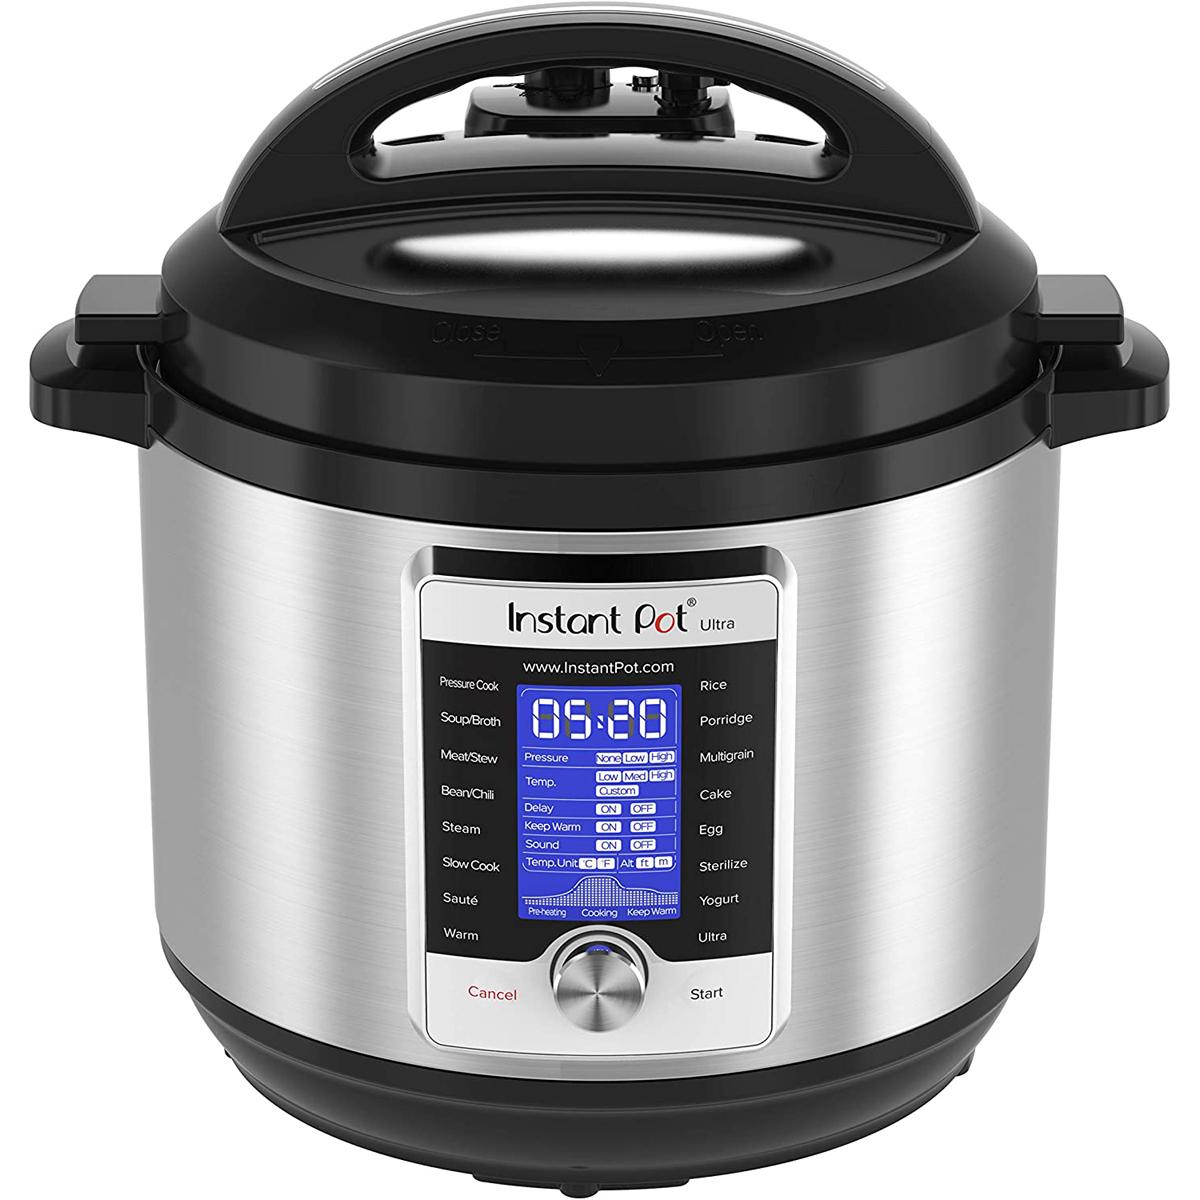 Instant Pot Ultra 80 Ultra 8 Qt 10-in-1 Pressure Cooker for $89.99 Shipped